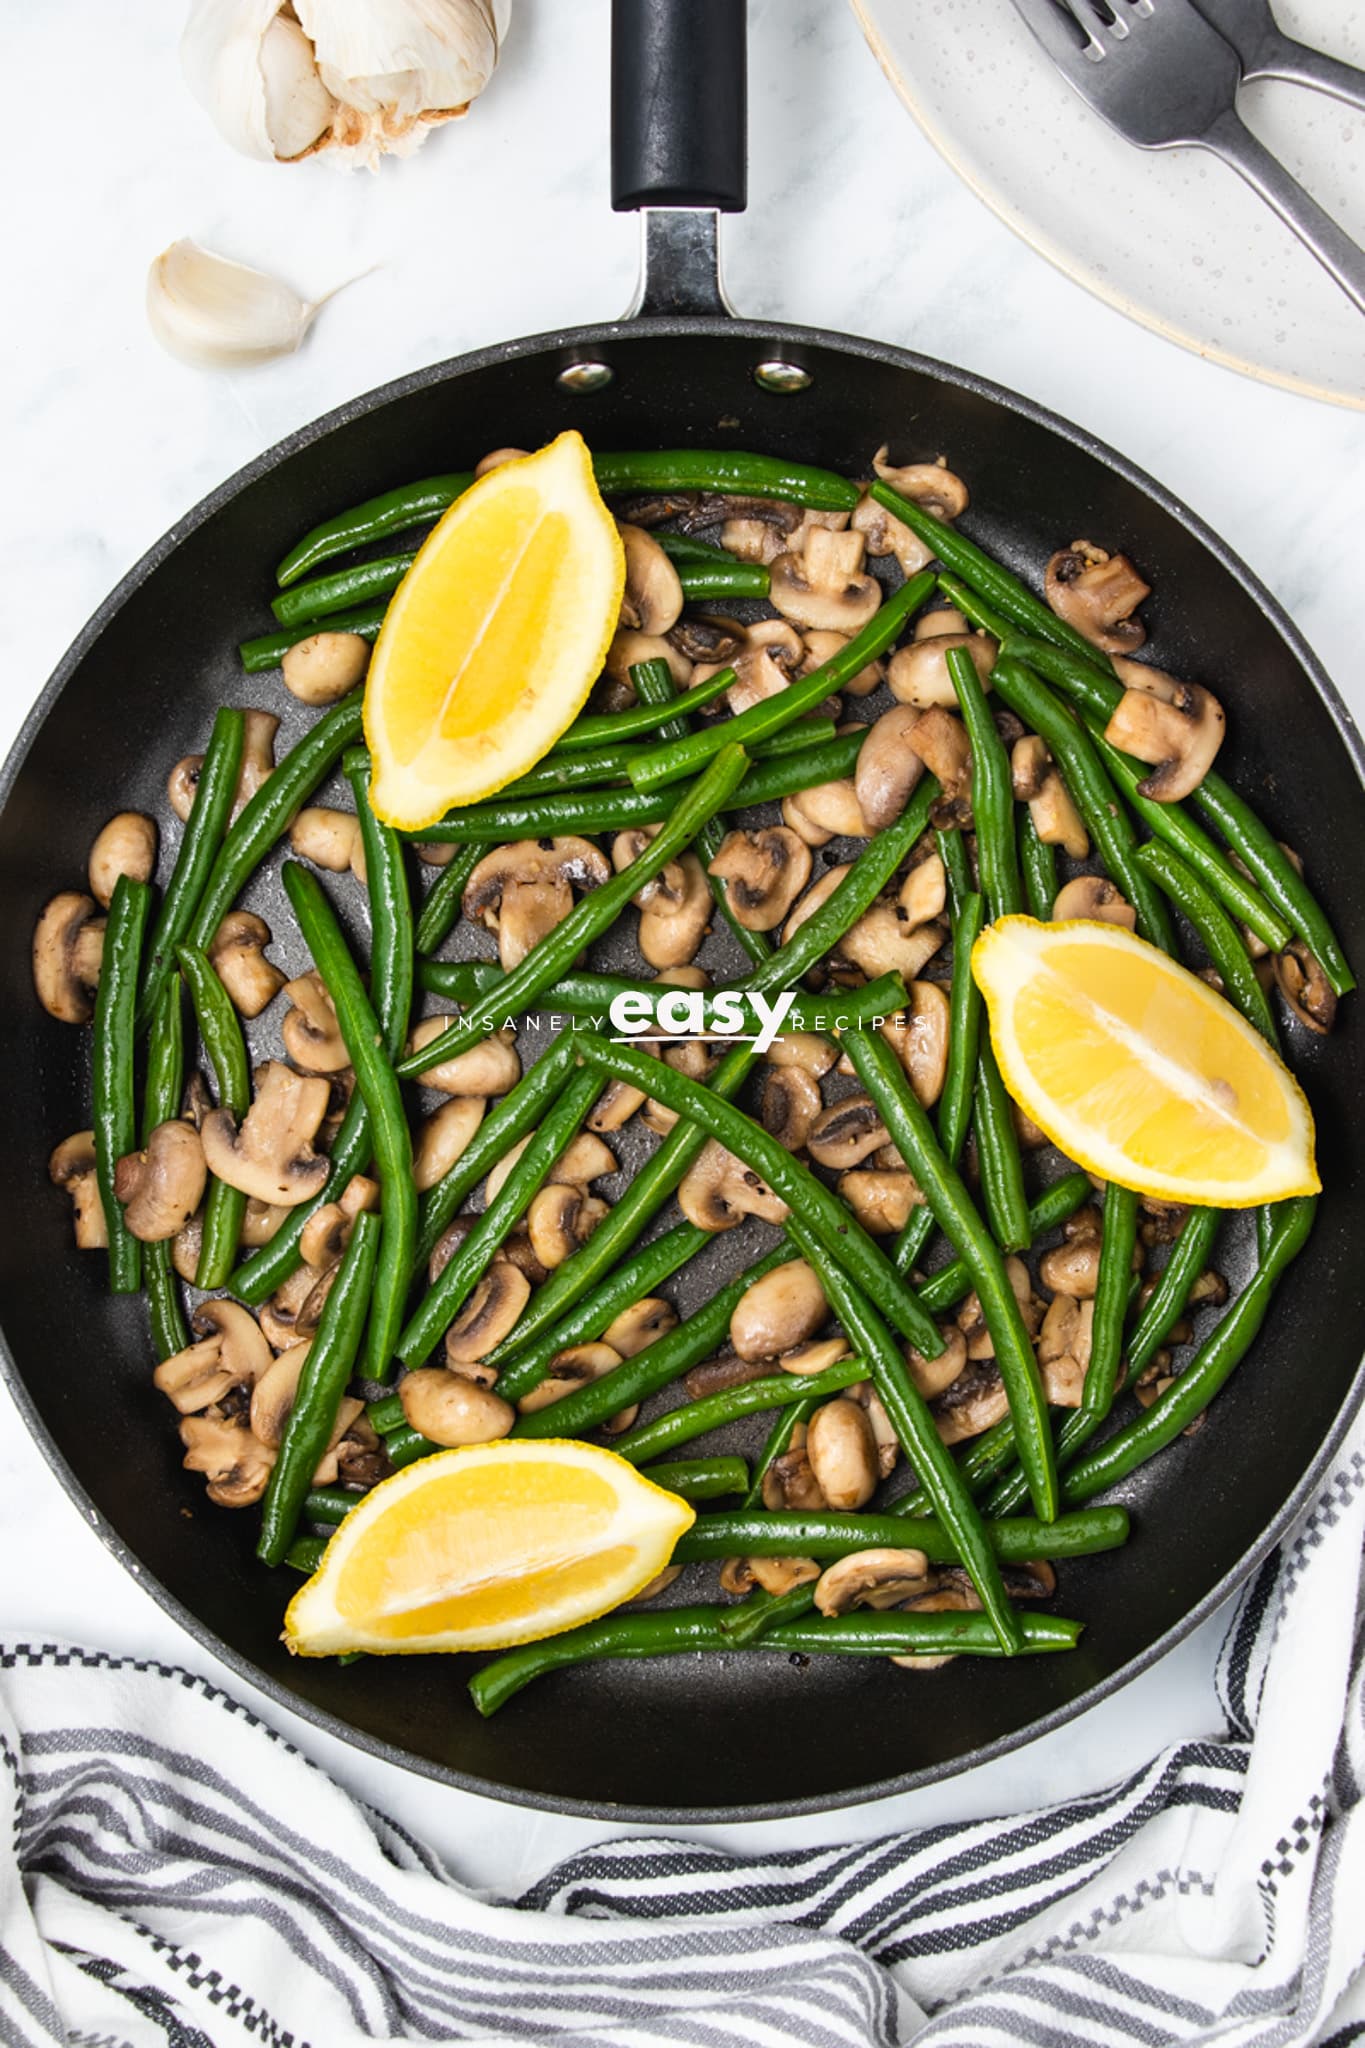 Sauteed green beans and mushrooms in a skillet with lemon wedges on top. The skillet is on a table with fresh garlic, a striped kitchen towel, and a small cutting board around it.